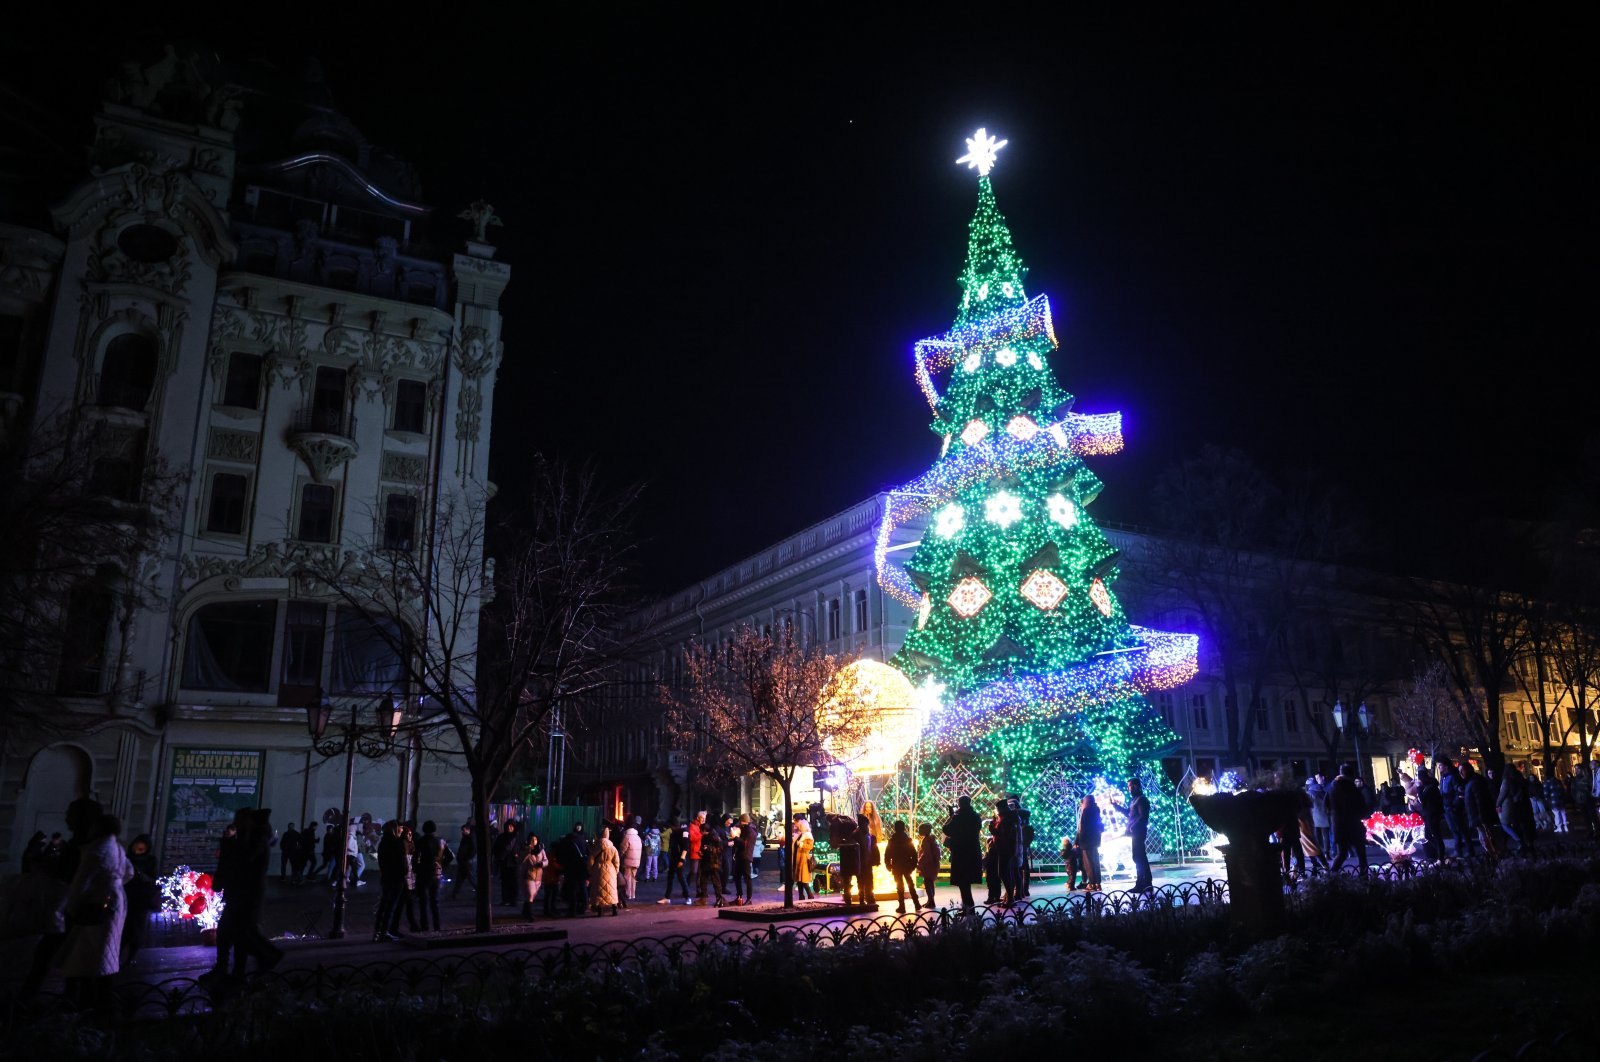  An illuminated Christmas tree powered by a generator stands in downtown Odessa, southern Ukraine, Dec. 30, 2022. (EPA File Photo)